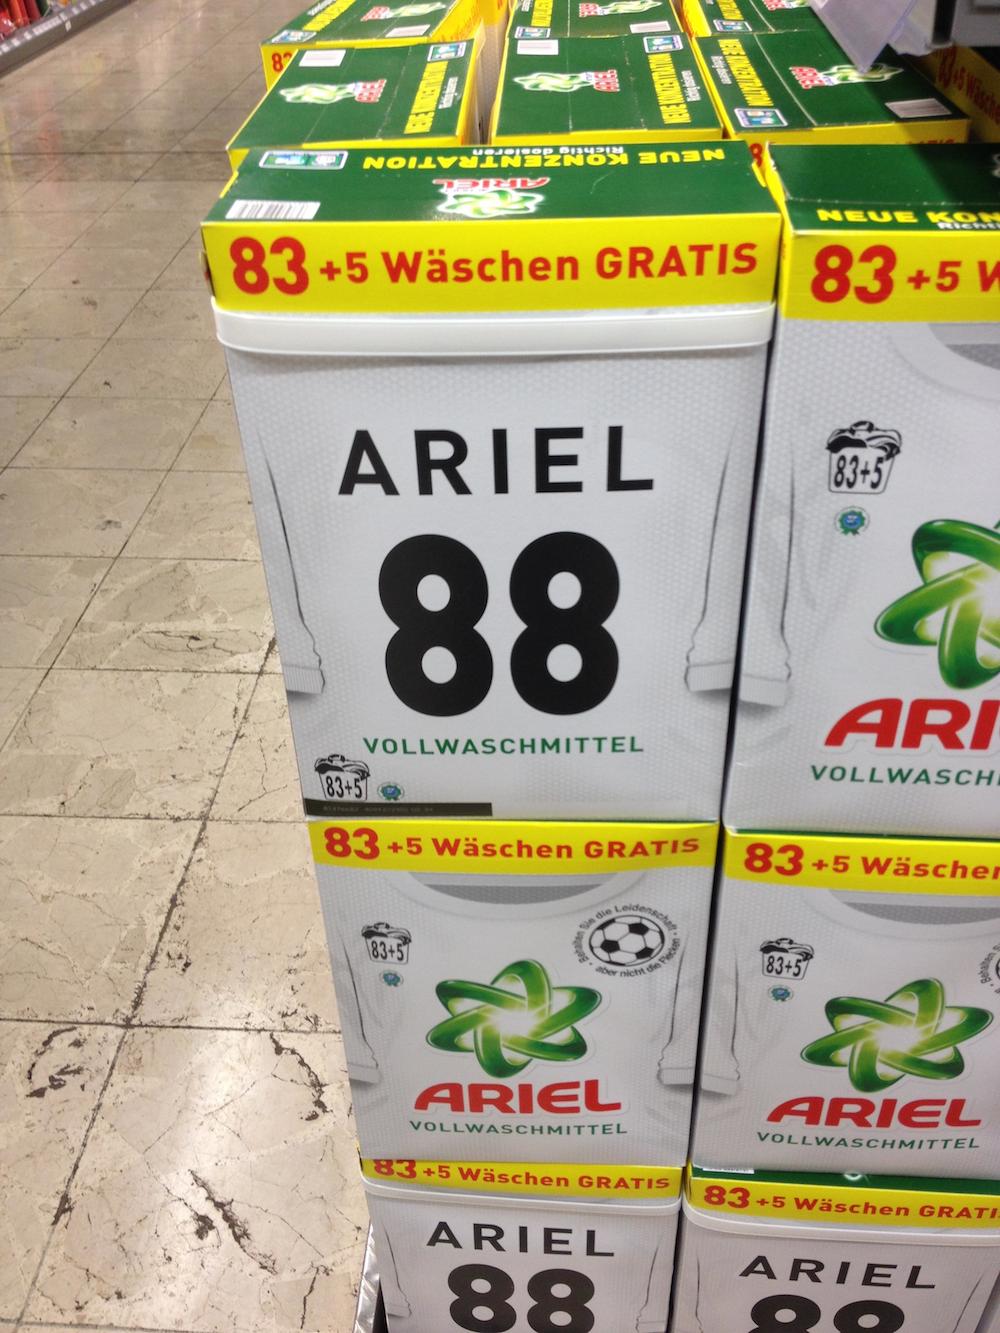 Ariel 88 - Extra white and with "new concentration". Actually on sale in Germany